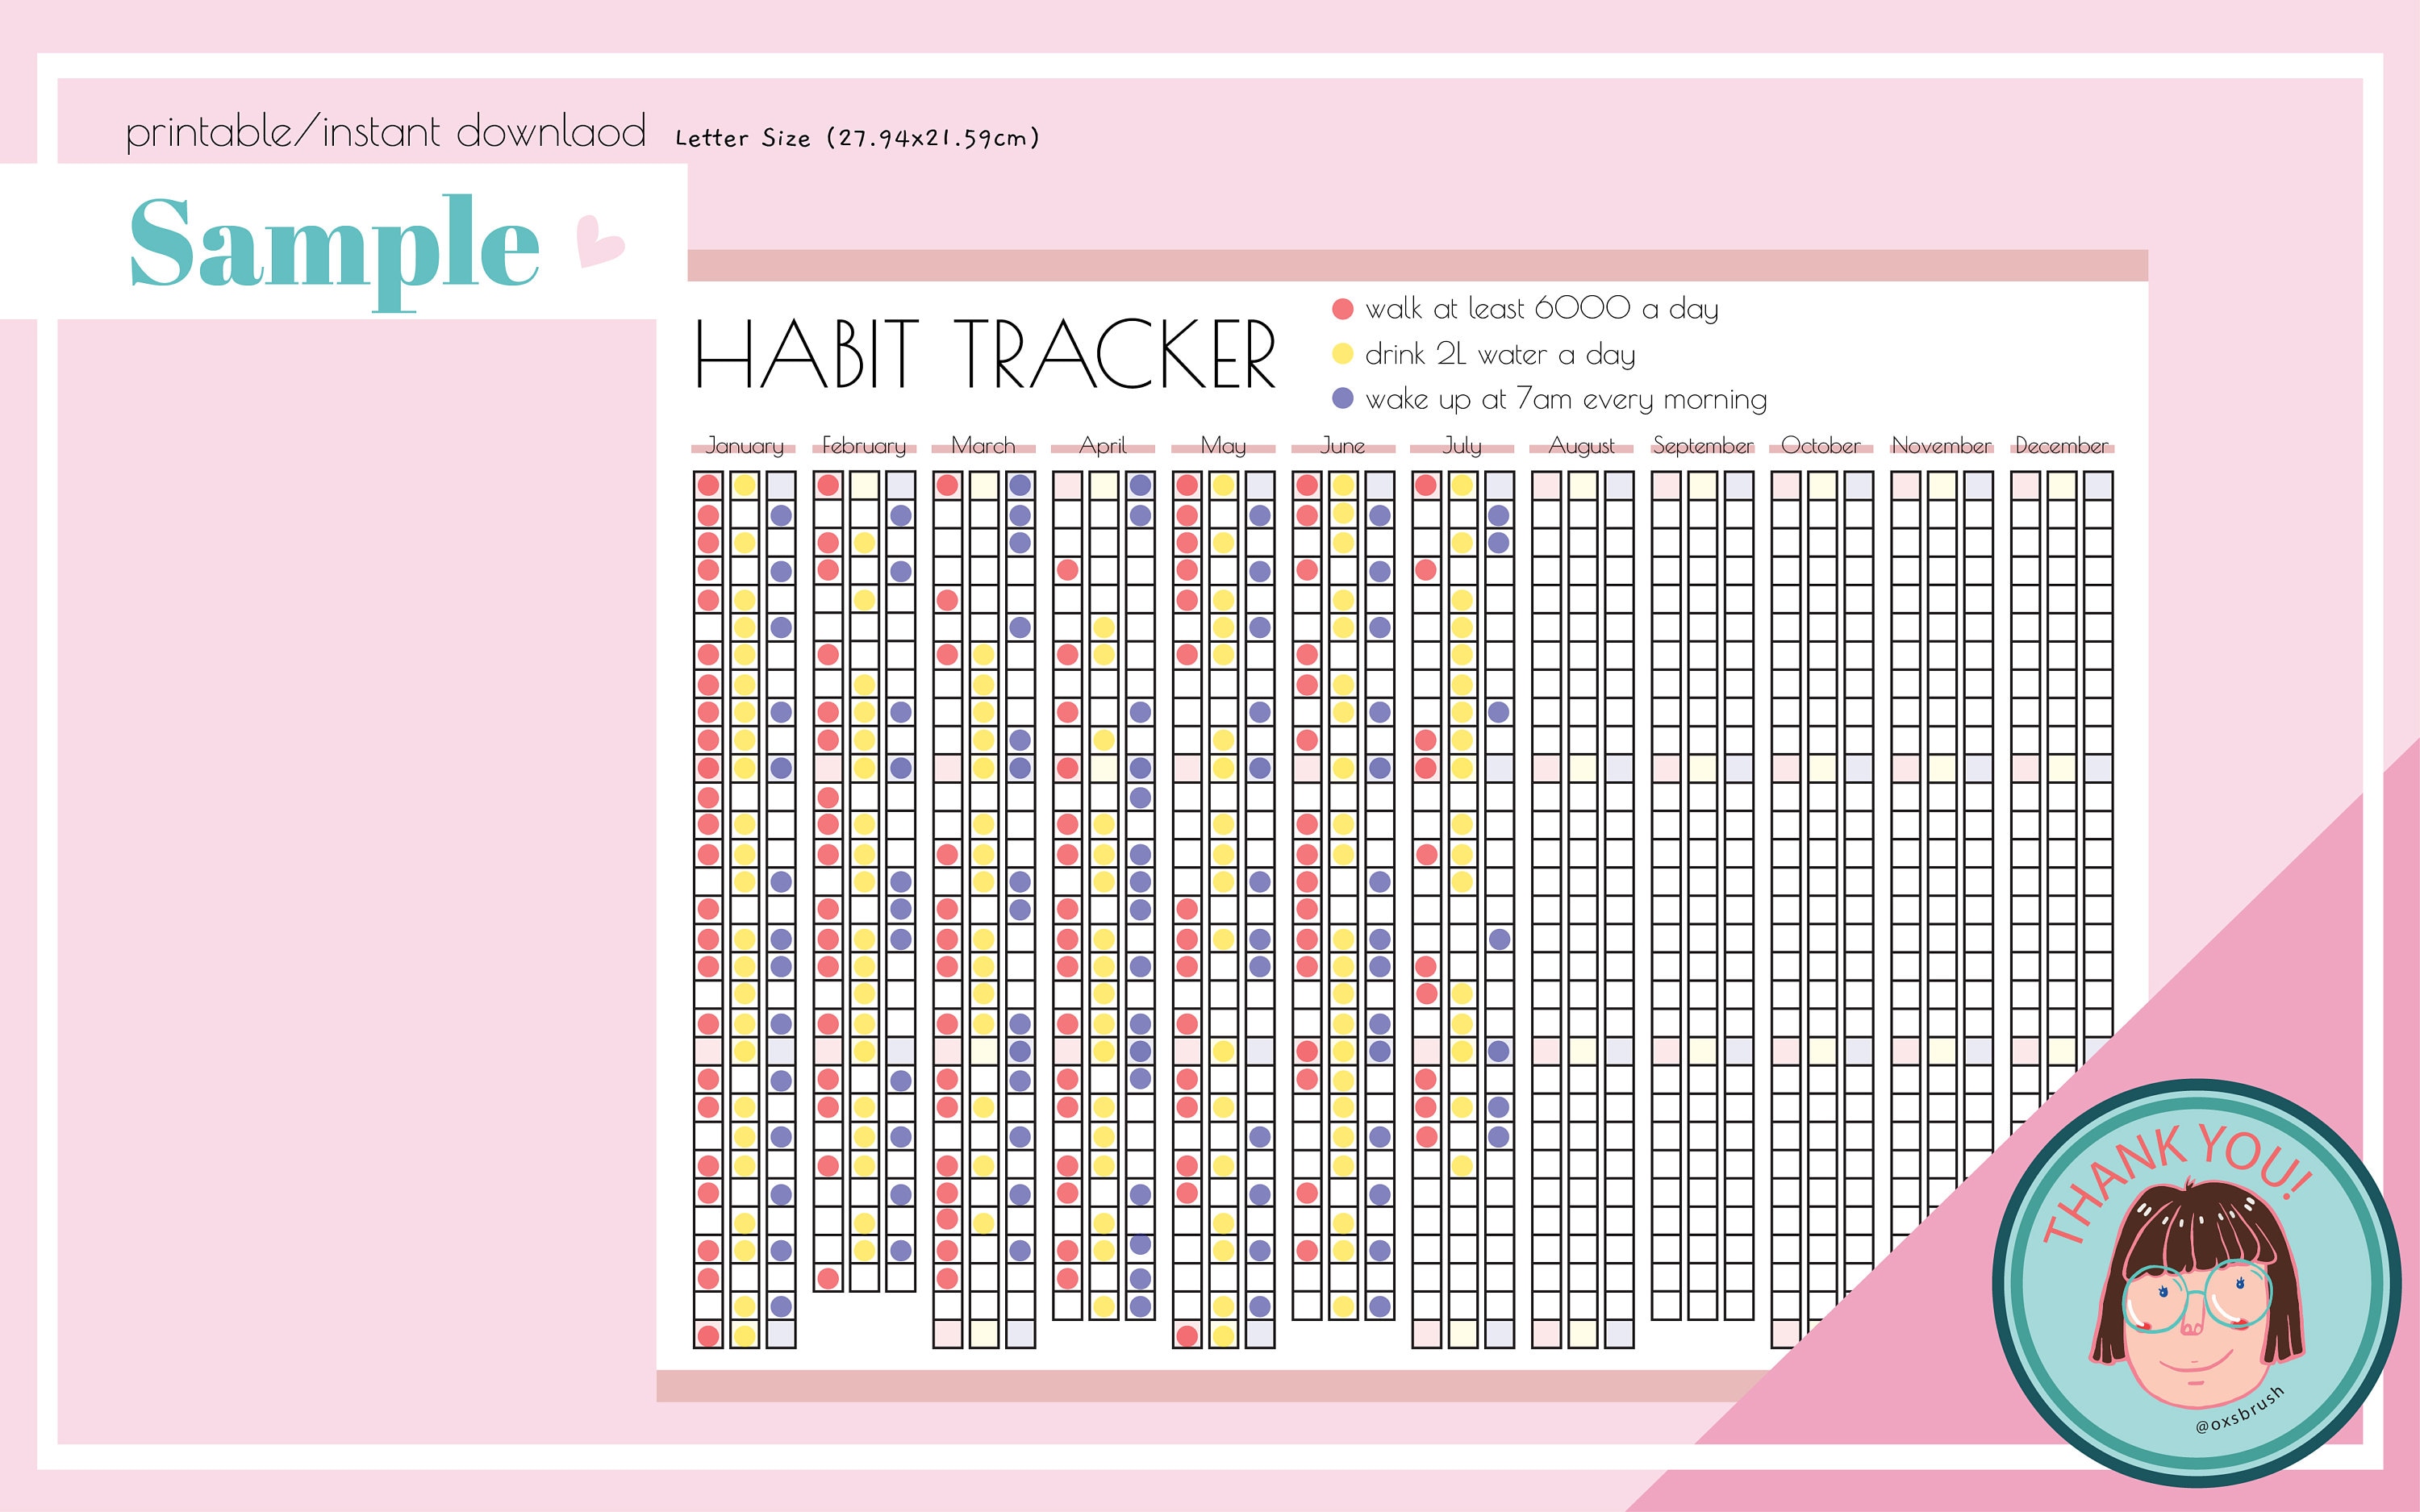 printable-habit-tracker-template-yearly-habit-tracker-annual-etsy-espa-a